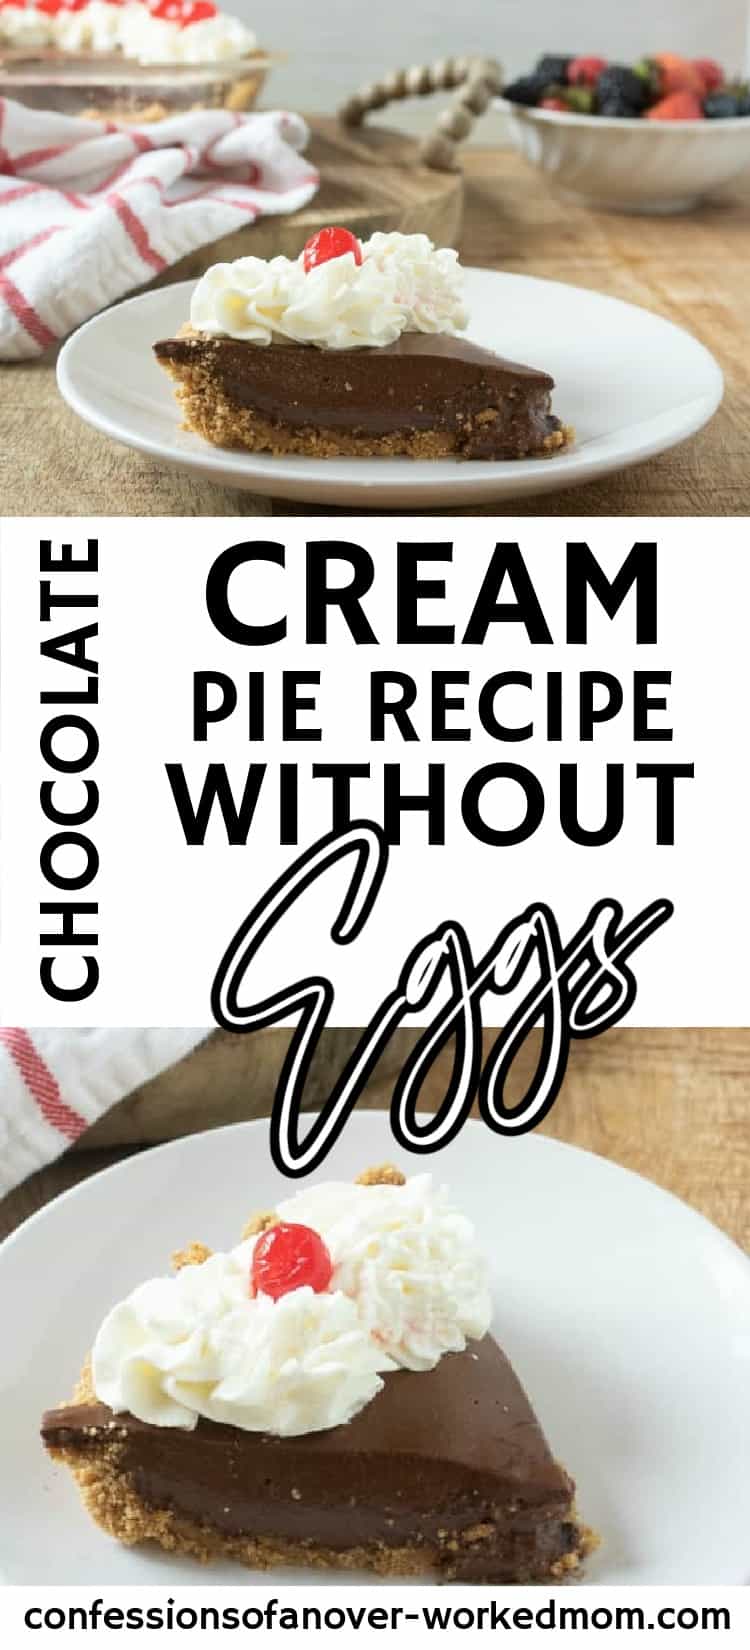 If you've been looking for a chocolate pie recipe without eggs, you have found it! Try this egg free chocolate pie today and see why it's a favorite.